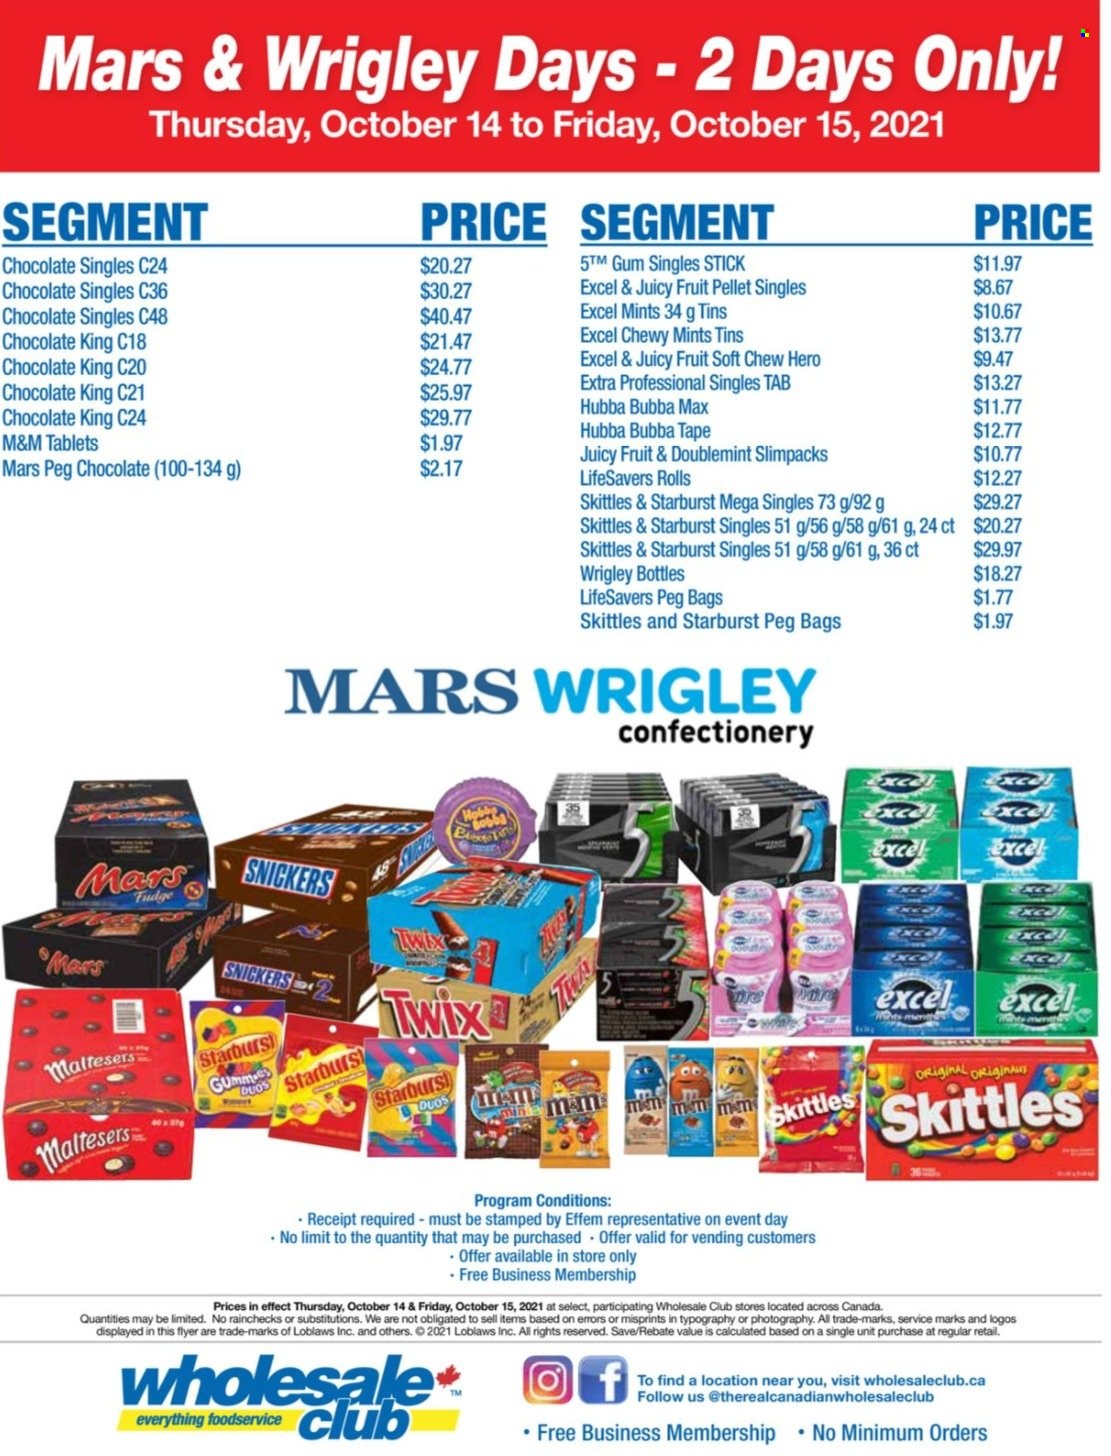 thumbnail - Wholesale Club Flyer - October 14, 2021 - October 15, 2021 - Sales products - fudge, chocolate, Snickers, Mars, Skittles, Starburst, bag, M&M's. Page 1.